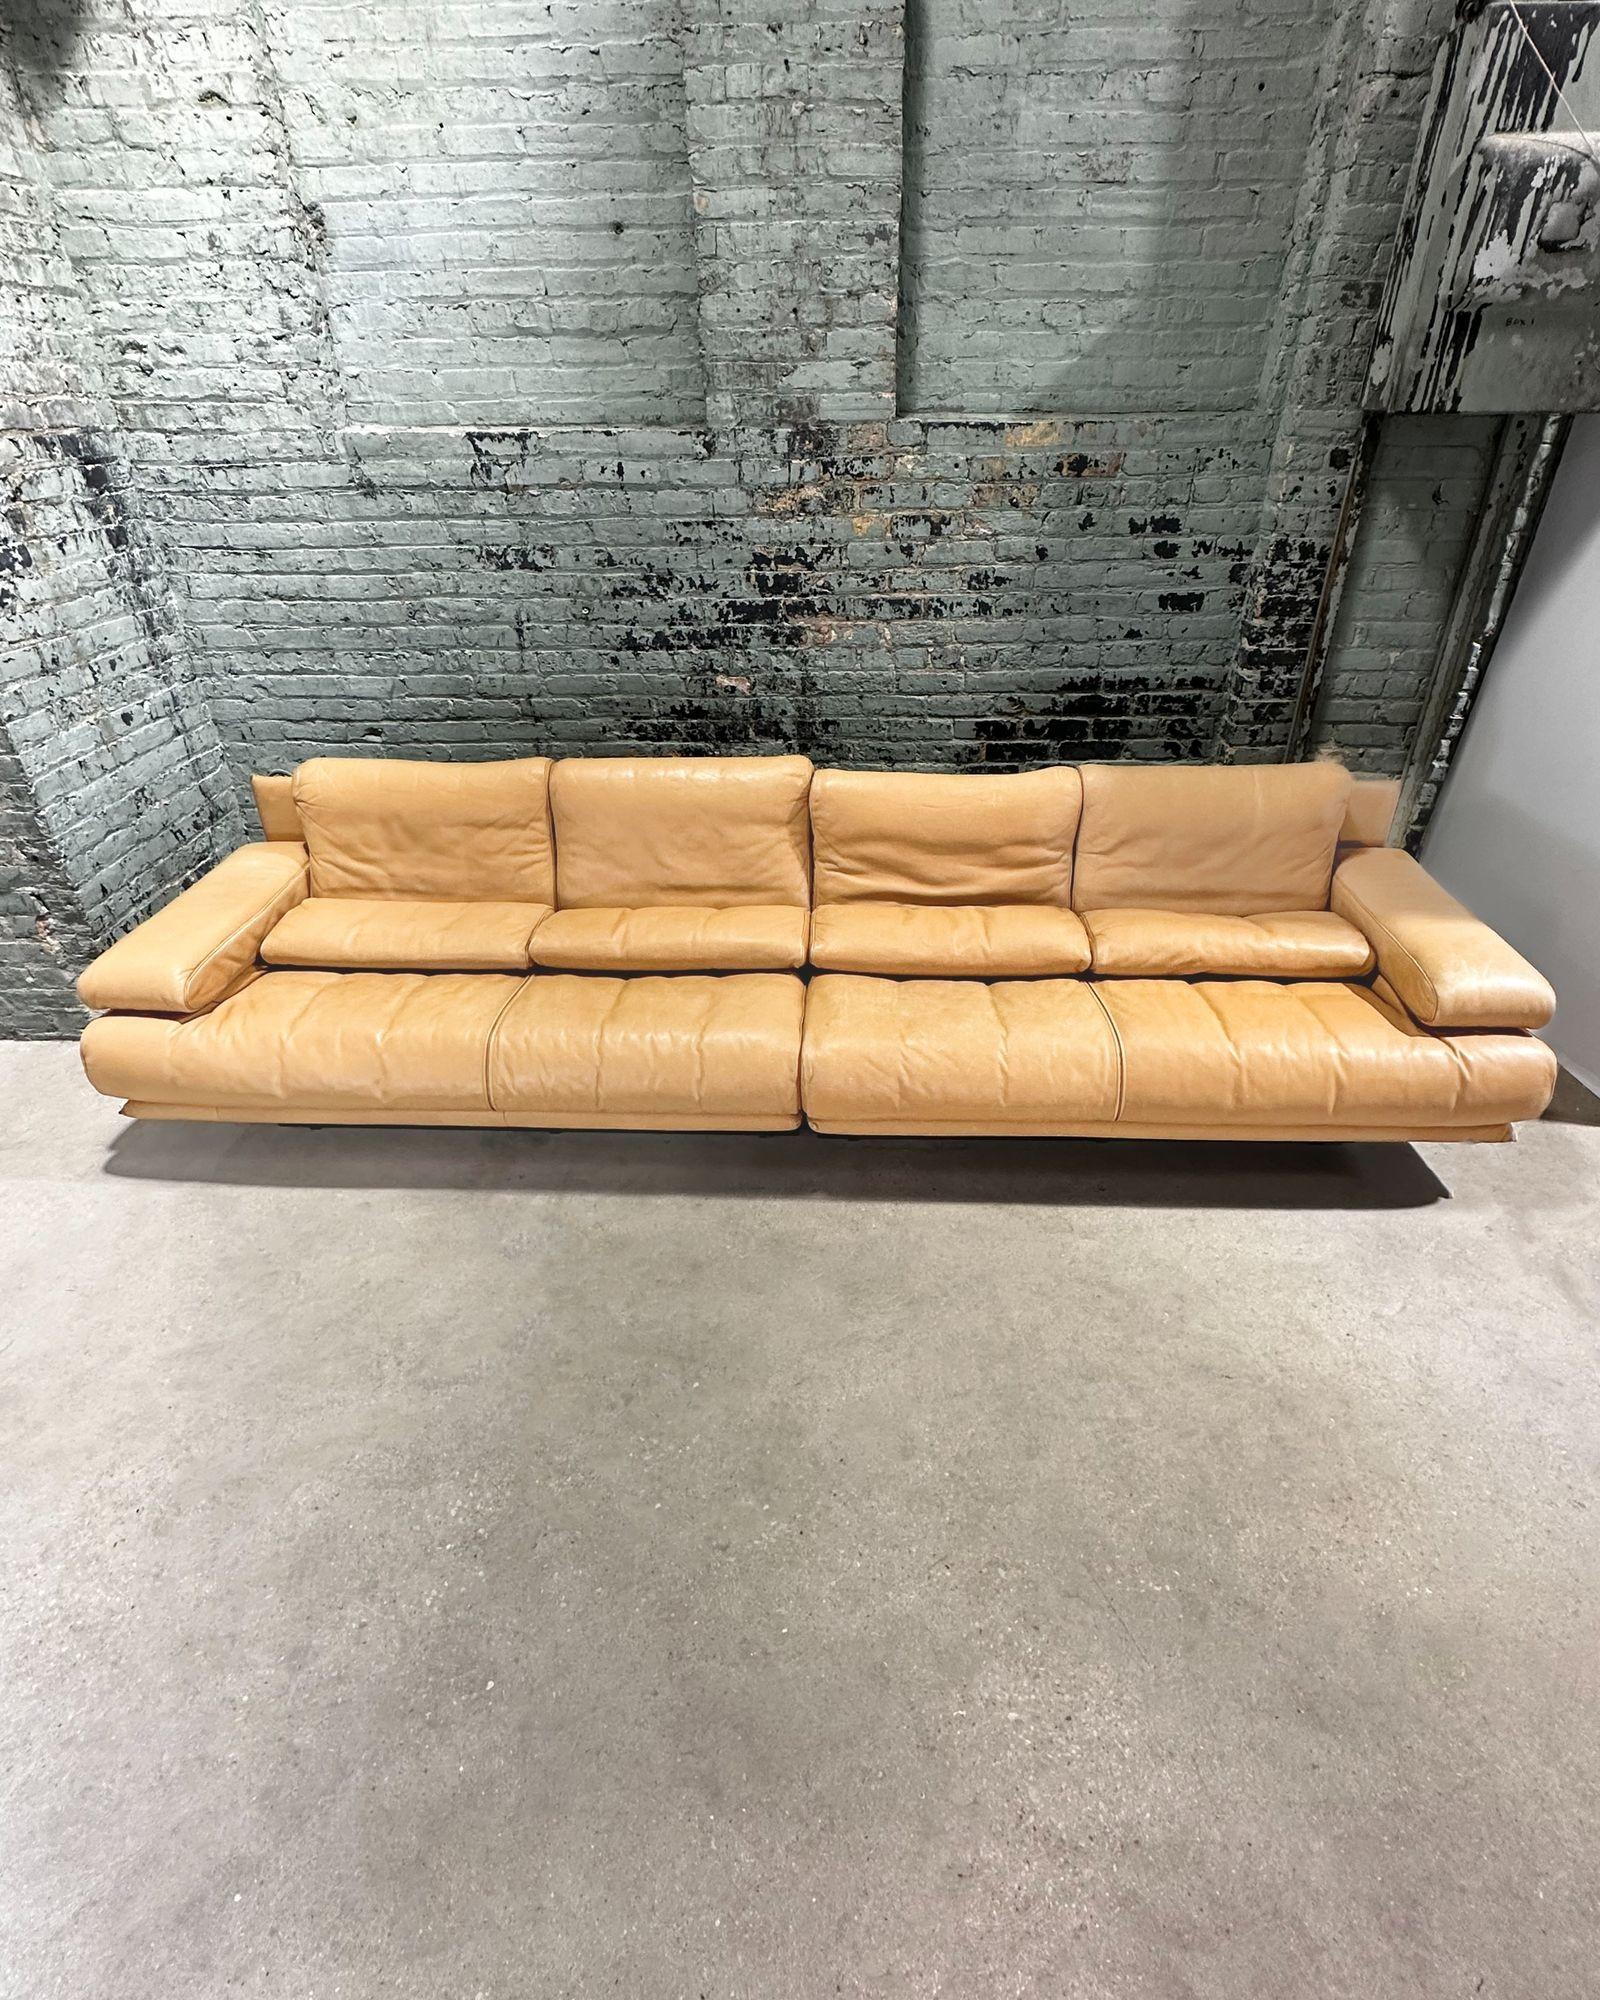 Post Modern Cy Mann 2 piece leather sectional sofa. Original leather. As you can see in pic there are minor issues on the back.
Measures 30